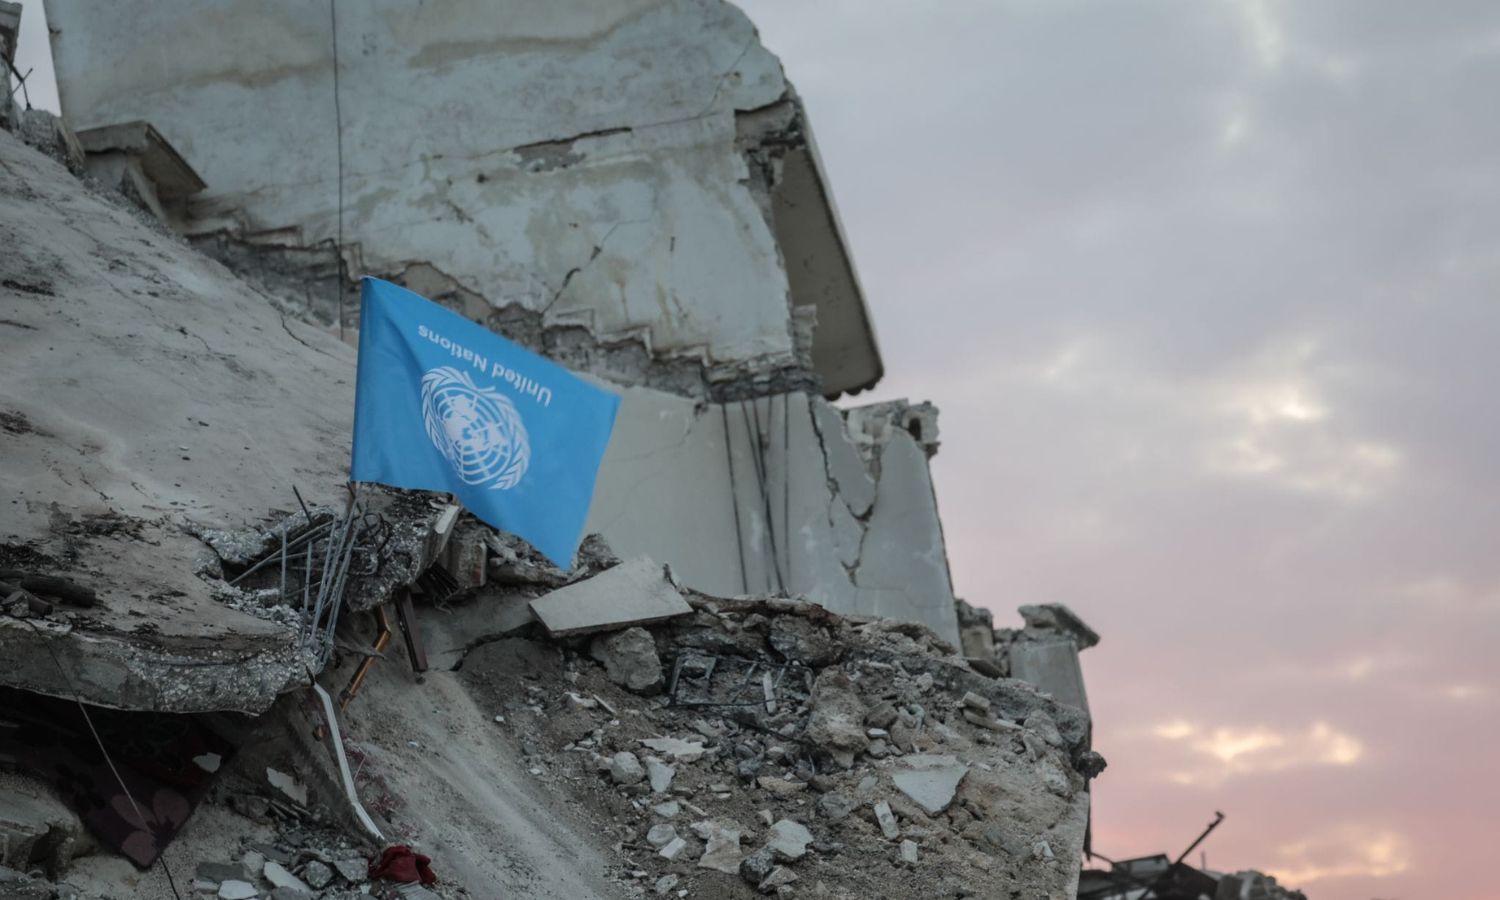 The UN flag, inverted atop the rubble of a destroyed building in the town of Jindires in the northern countryside of Aleppo, manifests disapproval of the delayed response following an earthquake that struck regions in Turkey and four Syrian provinces – February 11, 2023 (Walid Aktaa)